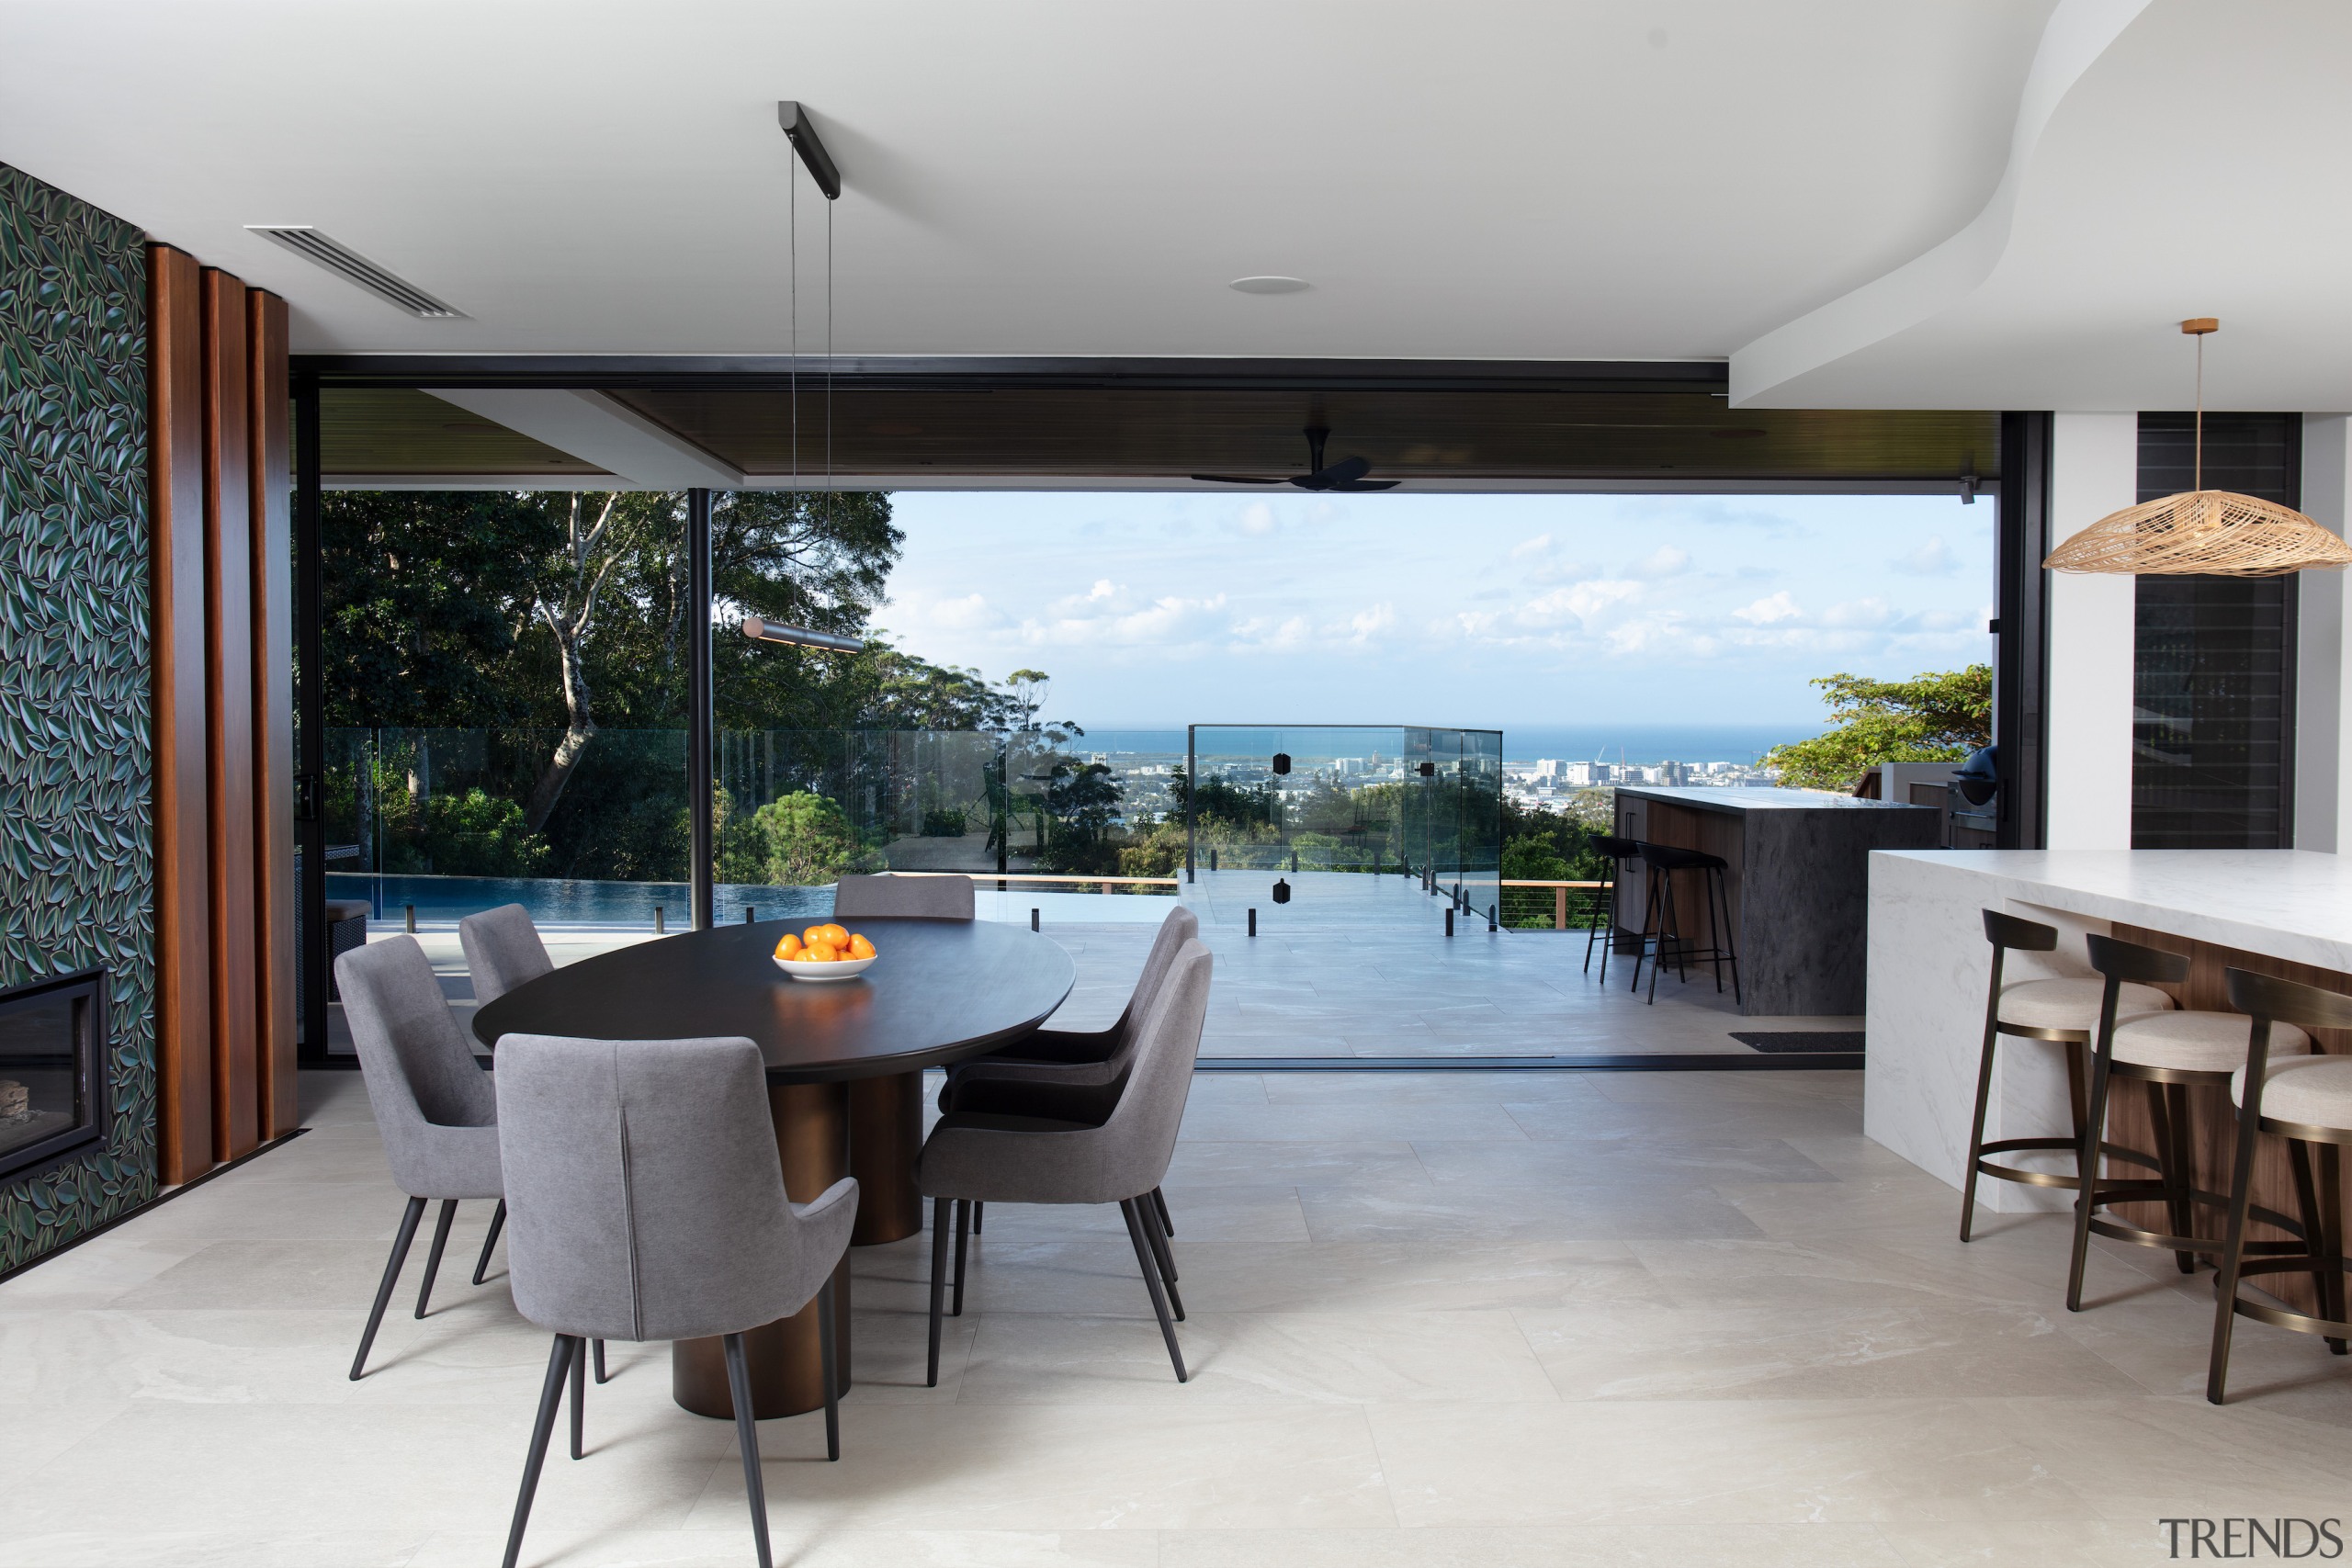 Dining, kitchen, outdoor living – and scenery! 